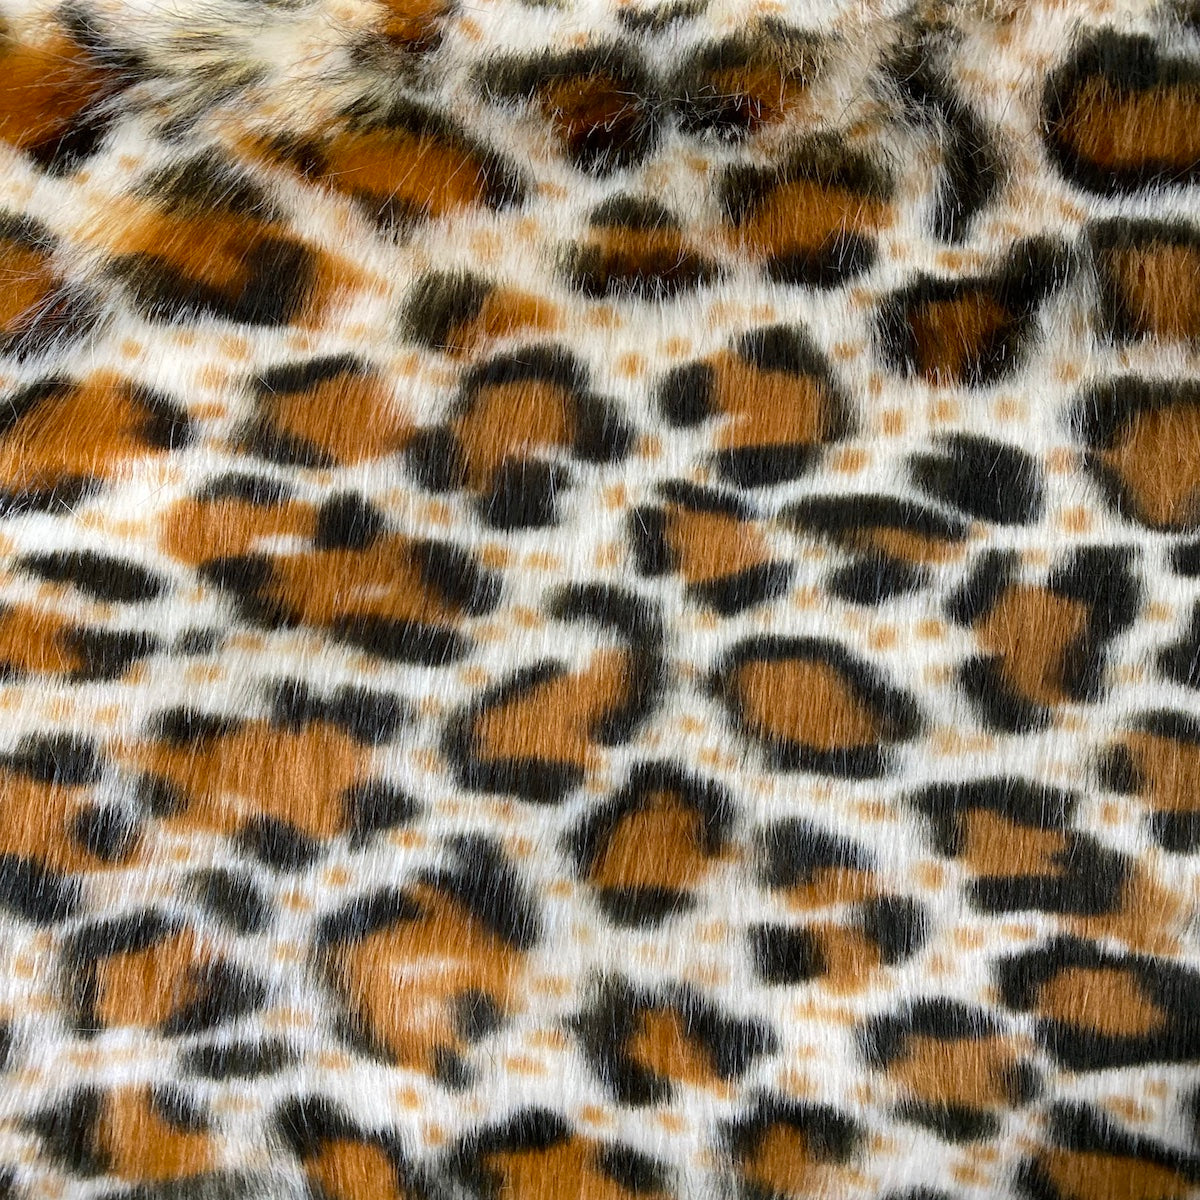 Gold Leopard Print Apparel Home Decor Faux Fur Fabric -Sold By The